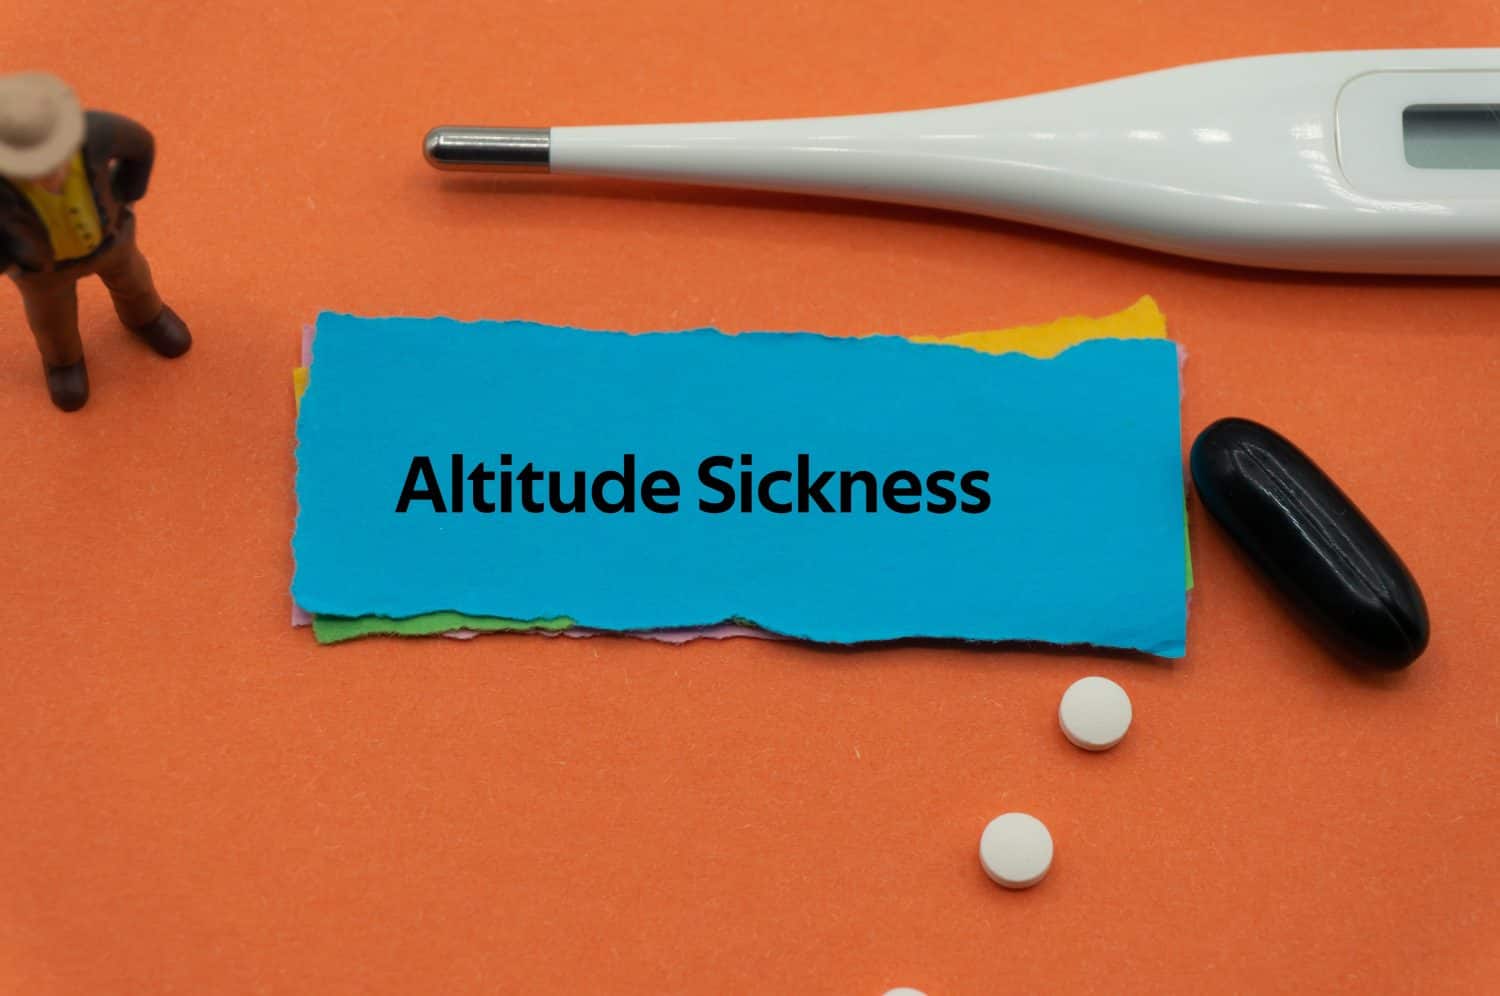 Altitude Sickness.The word is written on a slip of colored paper. health terms, health care words, medical terminology. wellness Buzzwords. disease acronyms.